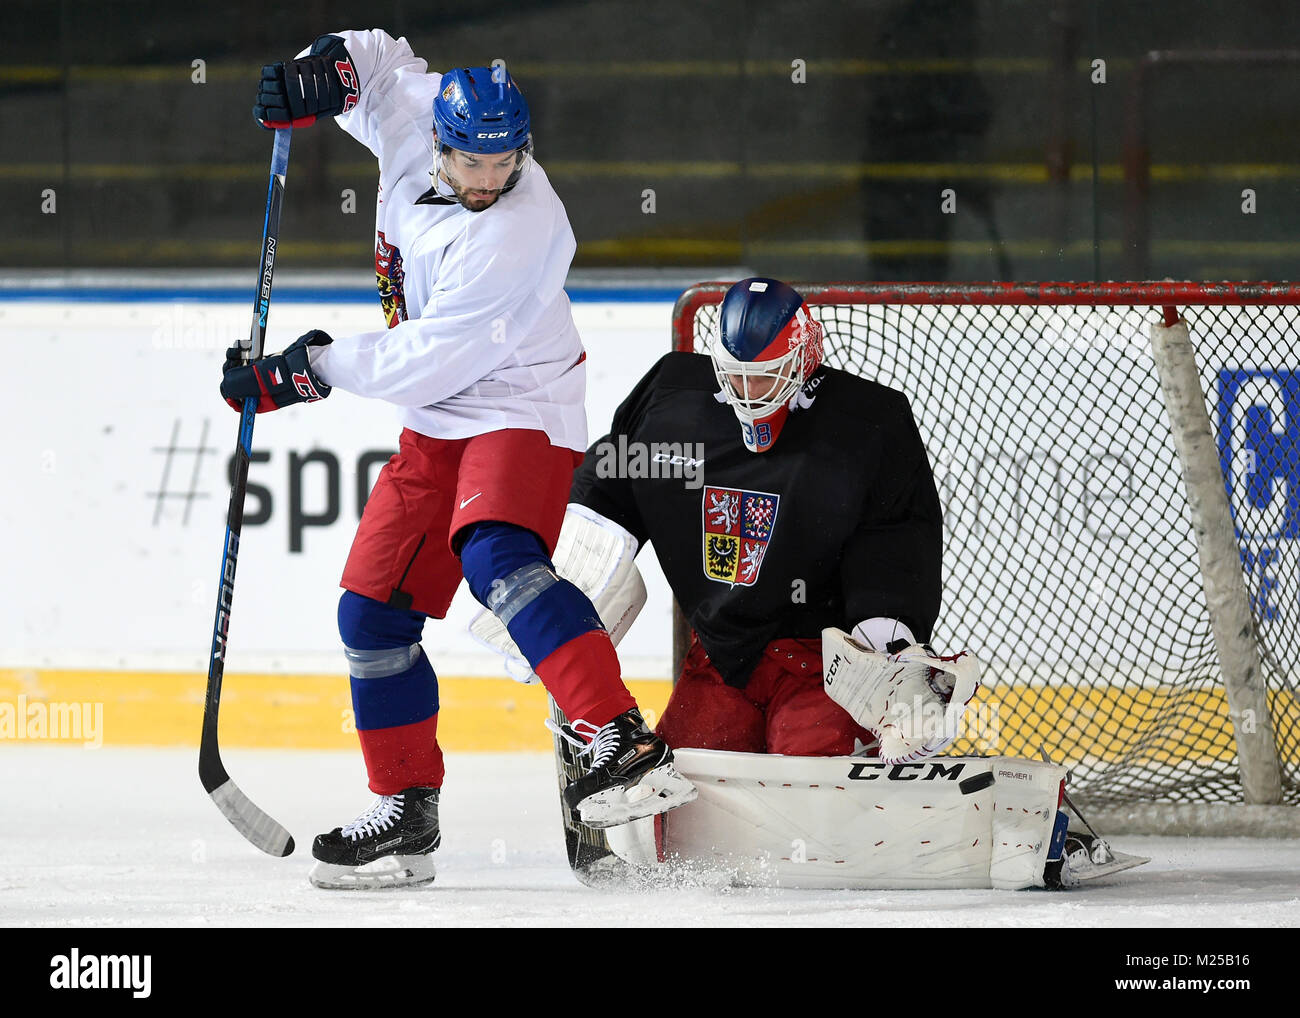 Prague, Czech Republic. 04th Feb, 2018. The Czech national team player Michal Birner and goalkeeper Dominik Furch attends a training session in Prague, Czech Republic, on Sunday, February 4, 2018, prior to the 2018 Winter Olympics in Pyeongchang, South Korea. Credit: Ondrej Deml/CTK Photo/Alamy Live News Stock Photo